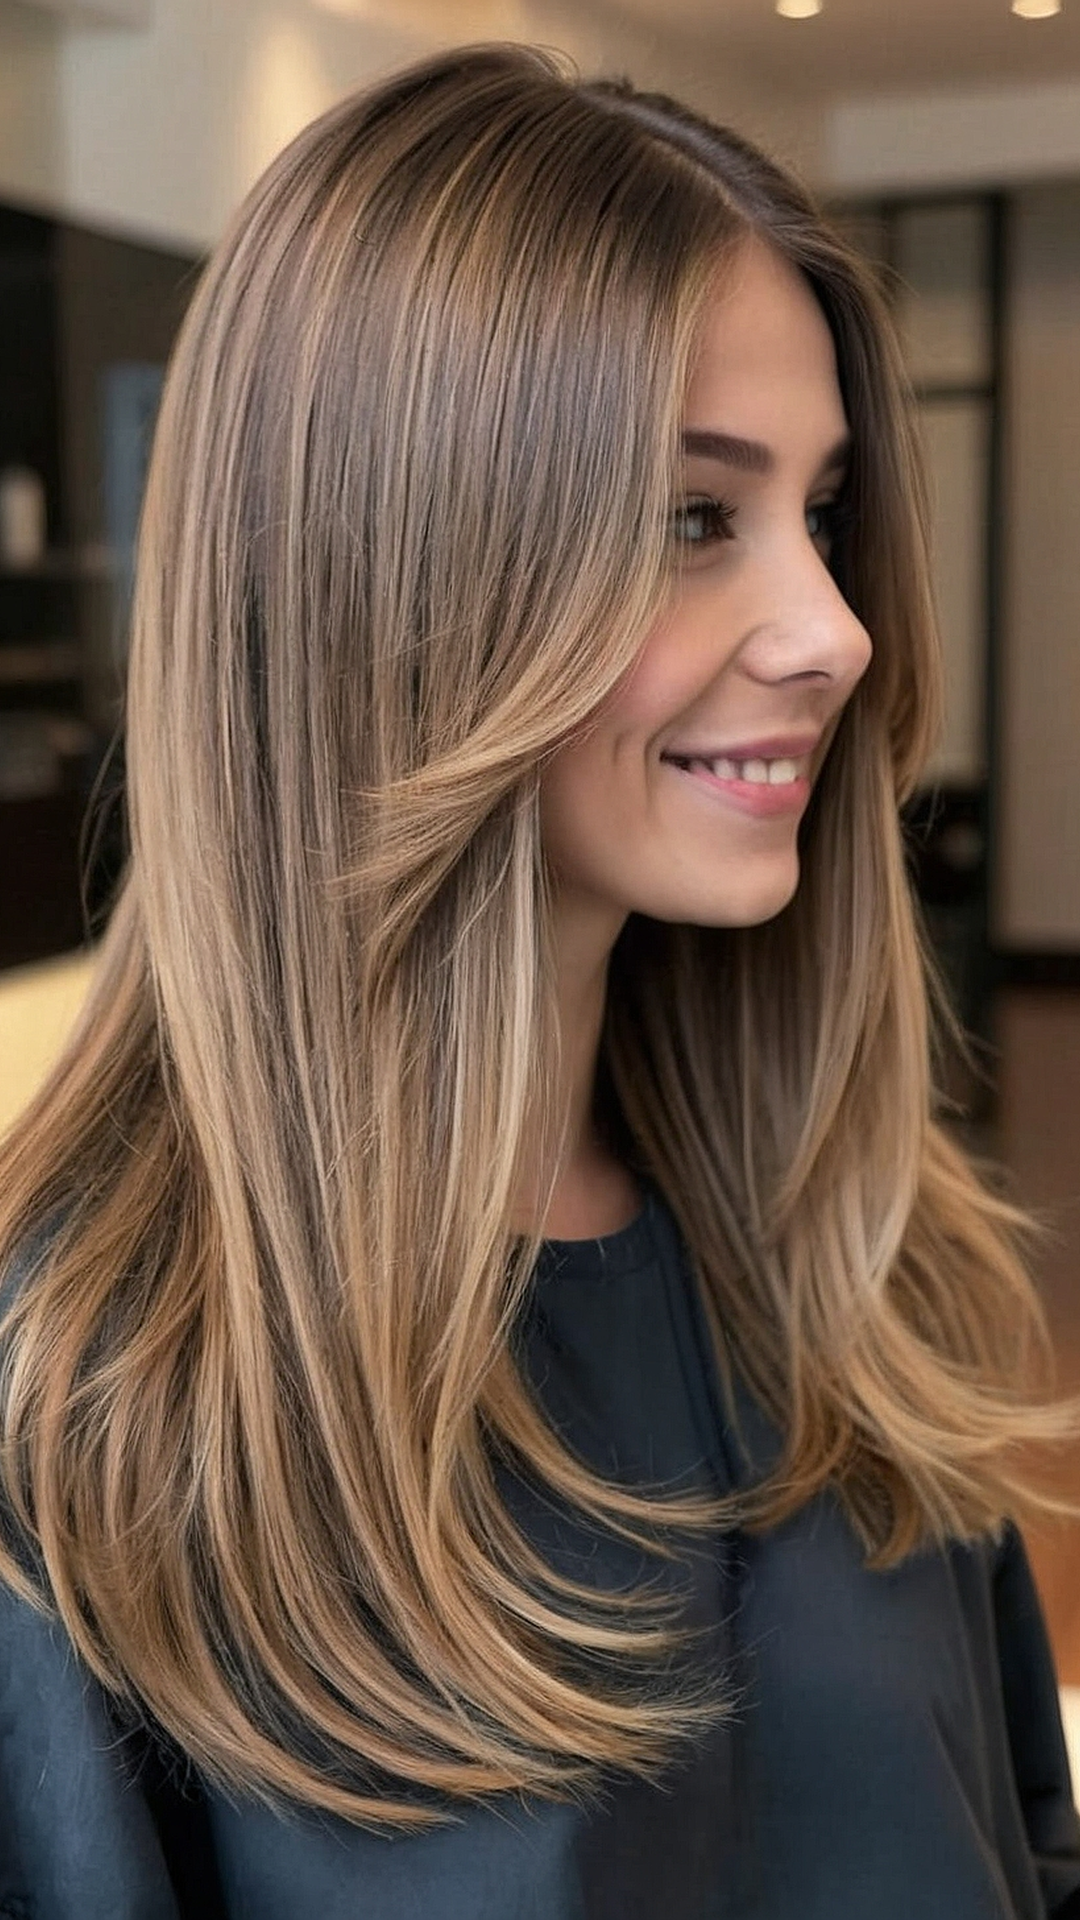 From Thin to Thick: Haircut Ideas for Fine Hair